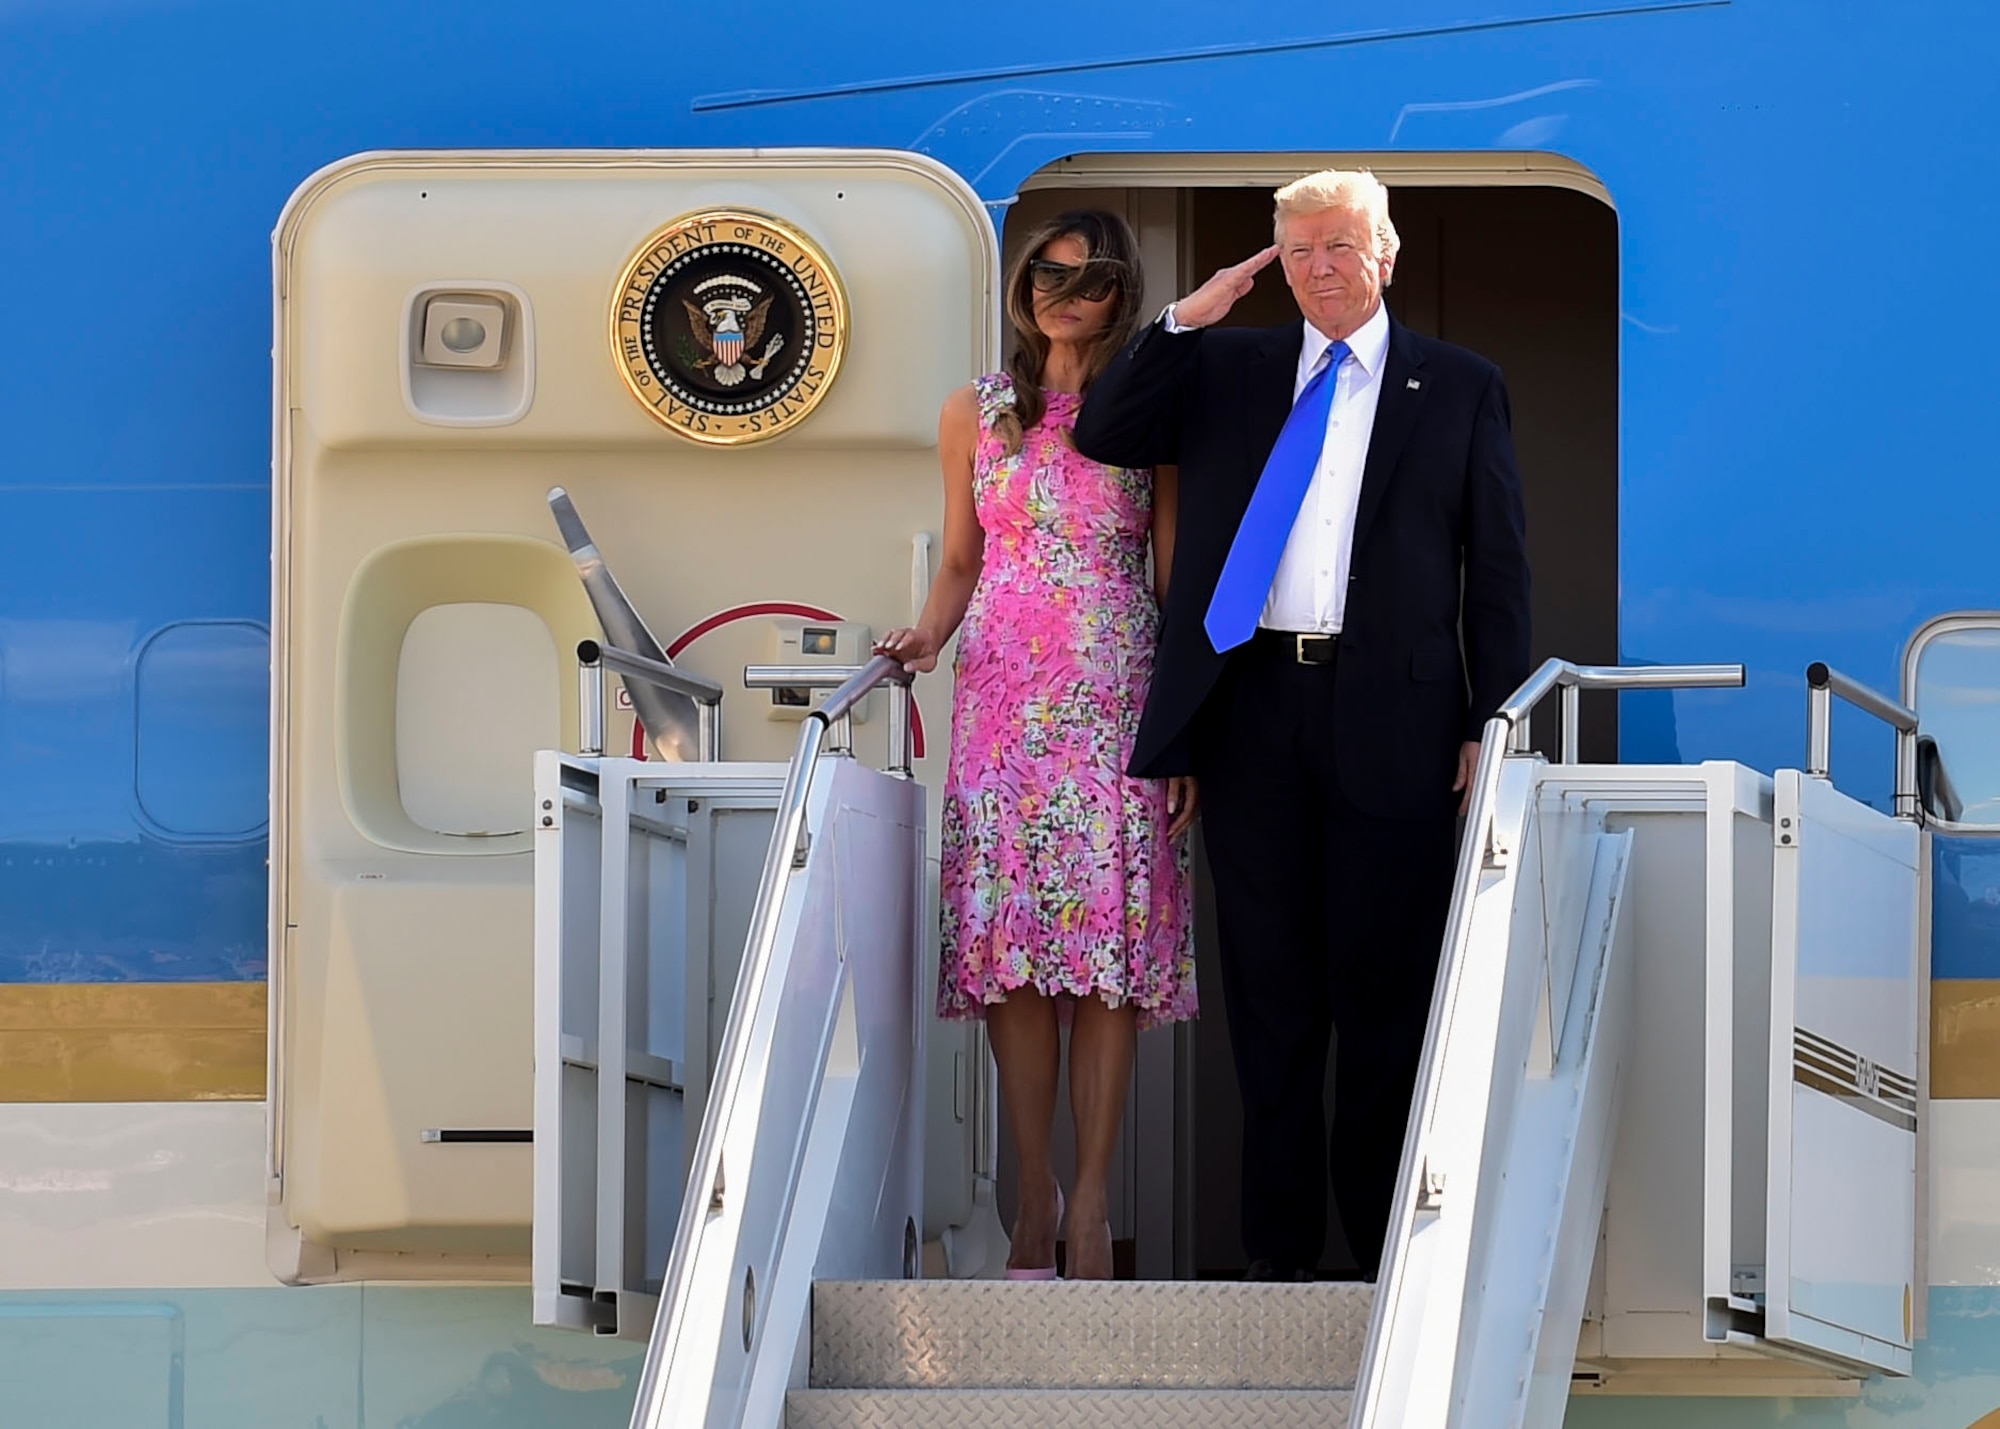 President Donald Trump renders a salute to Service members while standing next to First Lady Melania shortly after Air Force One landed here, July 25, 2017. Trump greeted Service members and guests before departing the station to attend events in and around the Youngstown, Ohio area. (U.S. Air Force photo/Senior Airman Jeffrey Grossi)